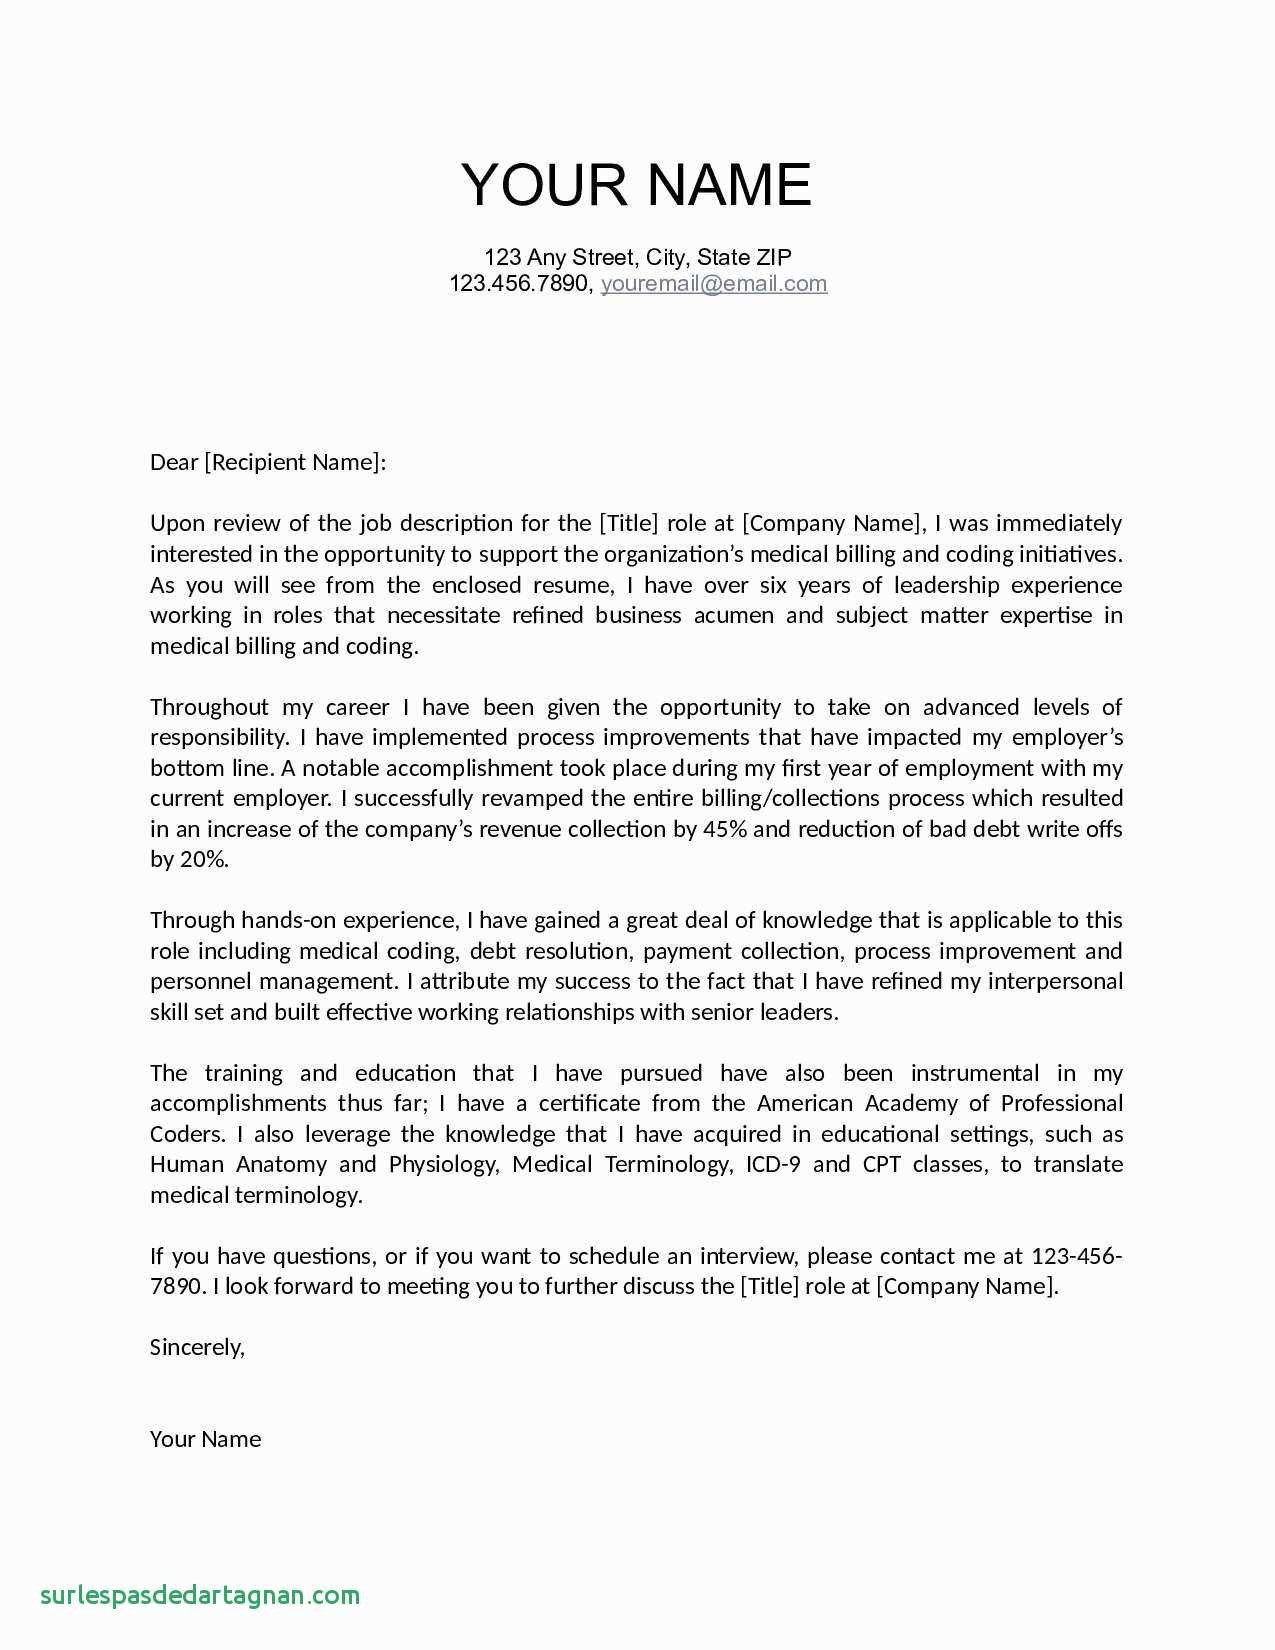 Creating A Cover Letter Template - How to Make Resume for Job Beautiful Fresh Job Fer Letter Template